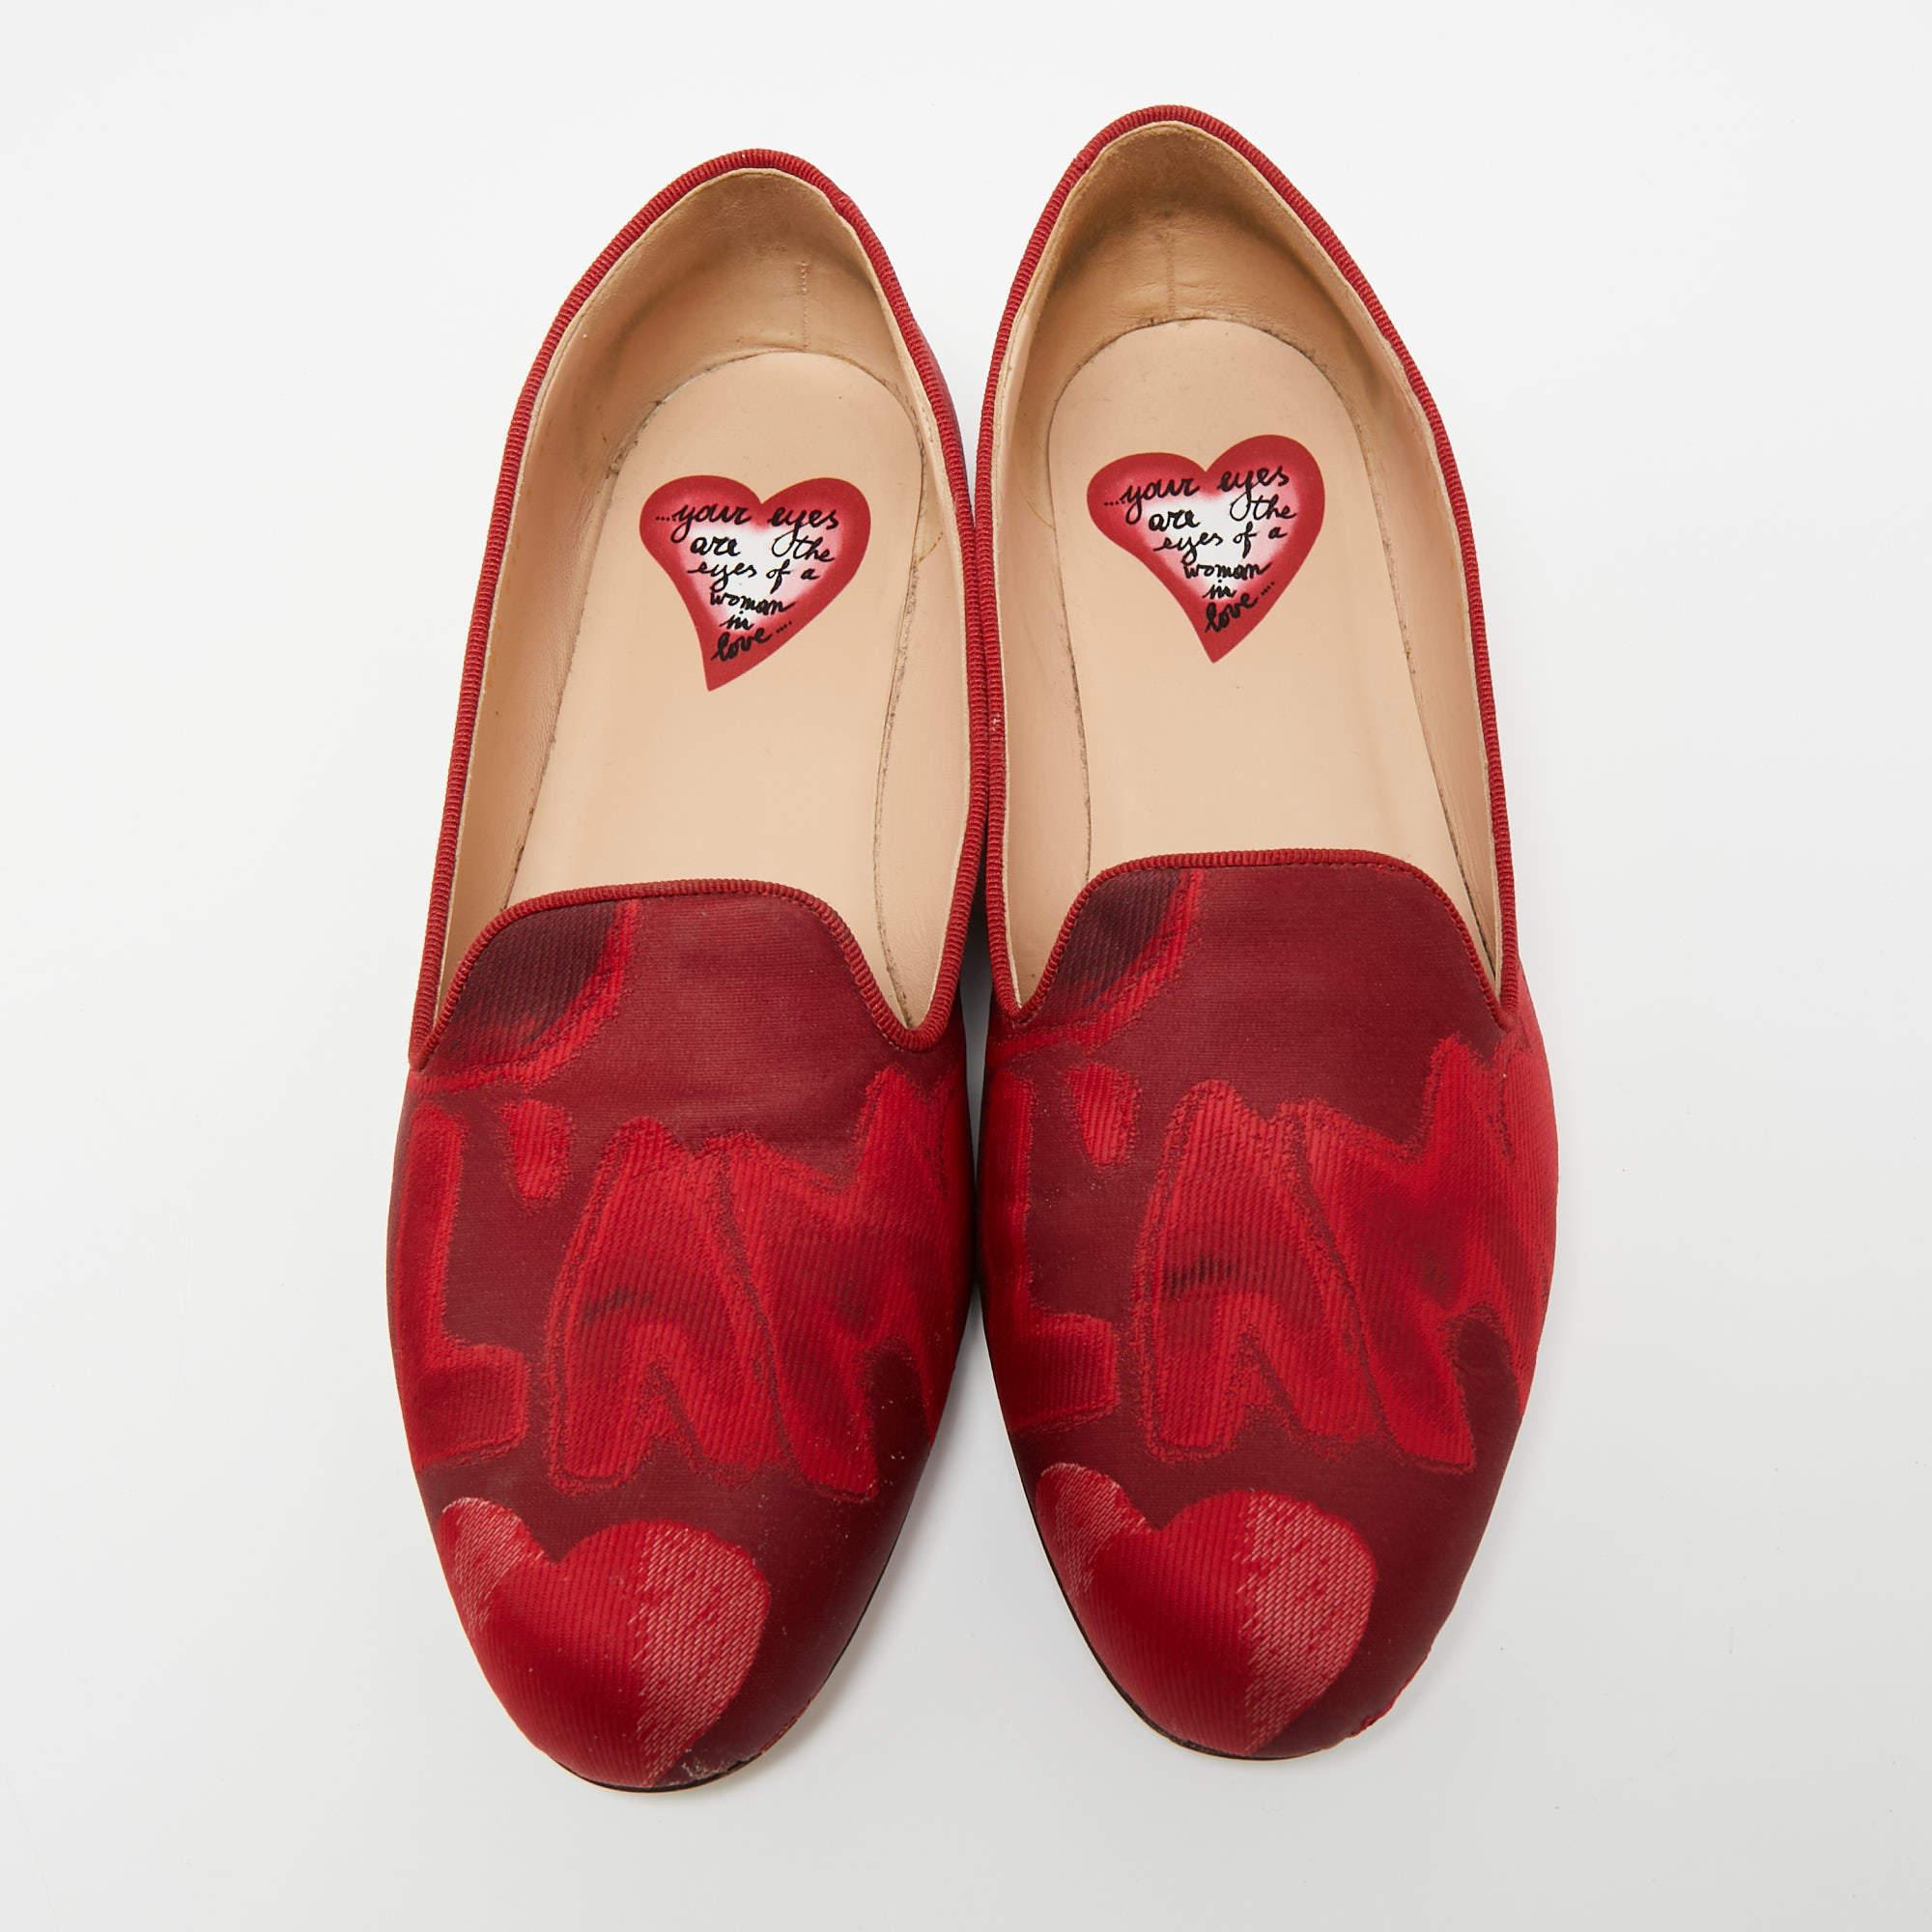 These smoking slippers from the House of Valentino are here to grant your feet the ultimate comfortable experience. They are crafted from red suede and flaunt an easy slip-on style. They are elevated with embroidery detailing. Add these trendy